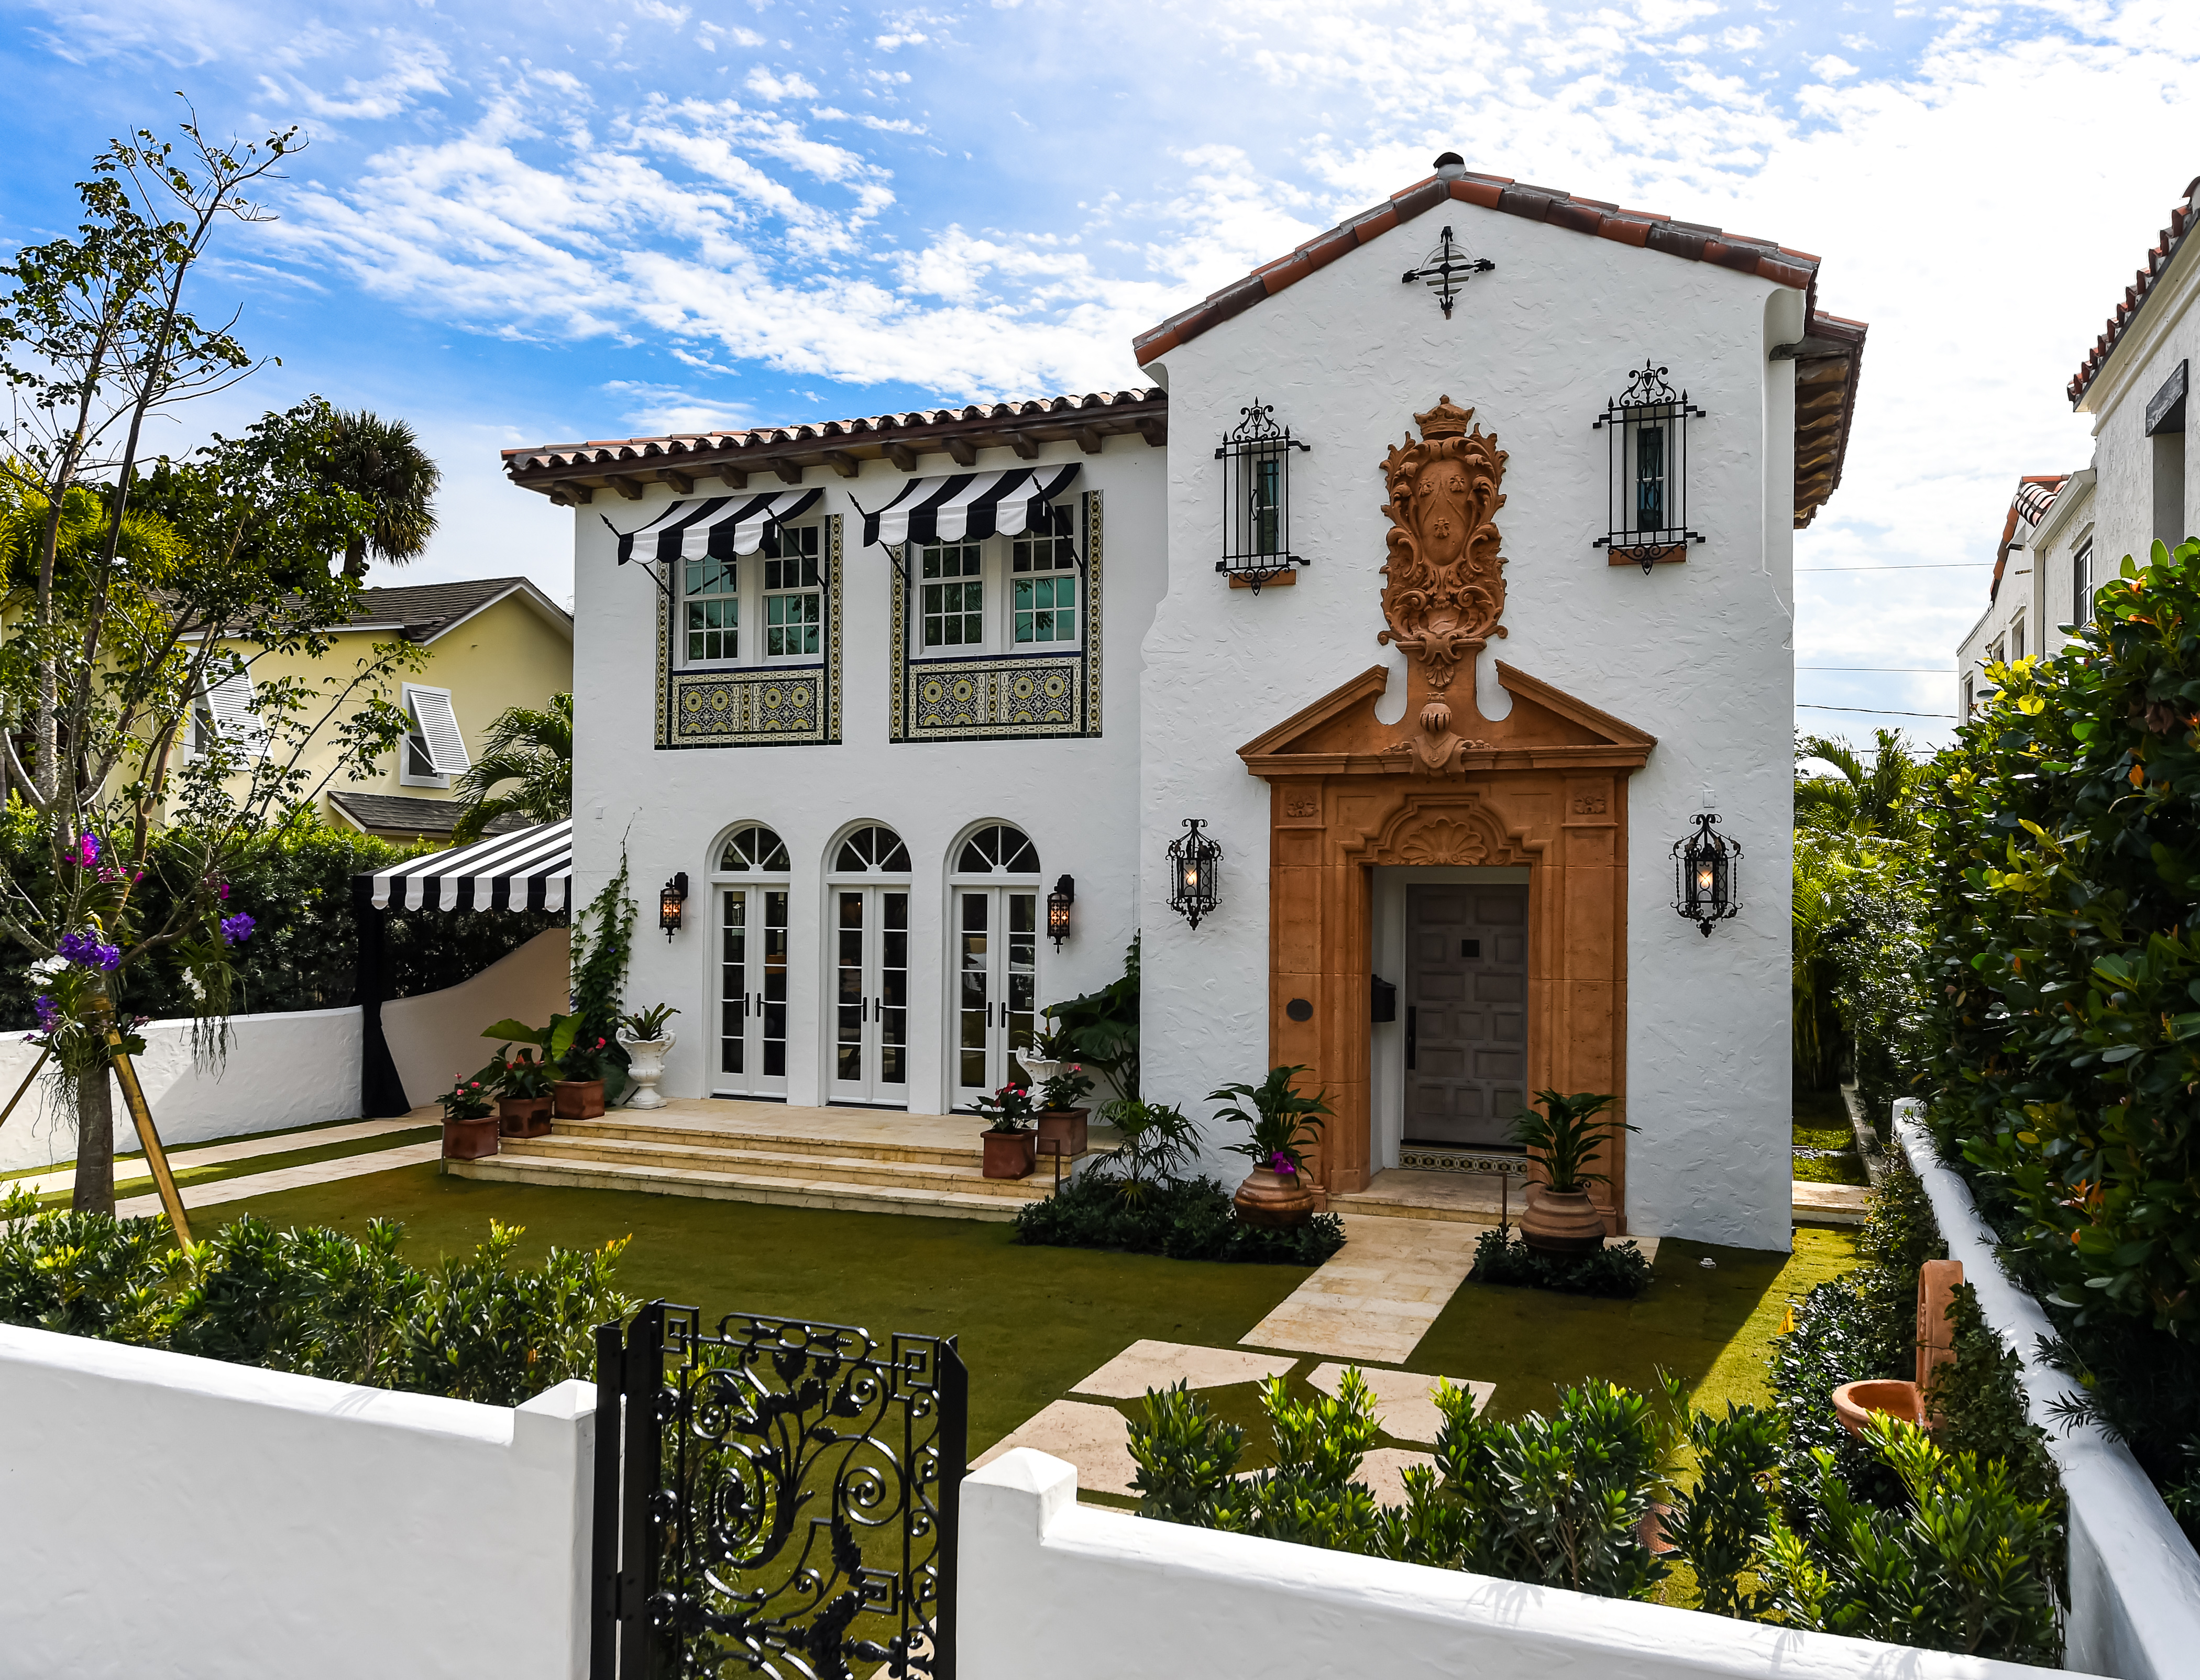 A Spanish style home features white stucco, striped awnings, and an elaborate wood portico at the entrance. 